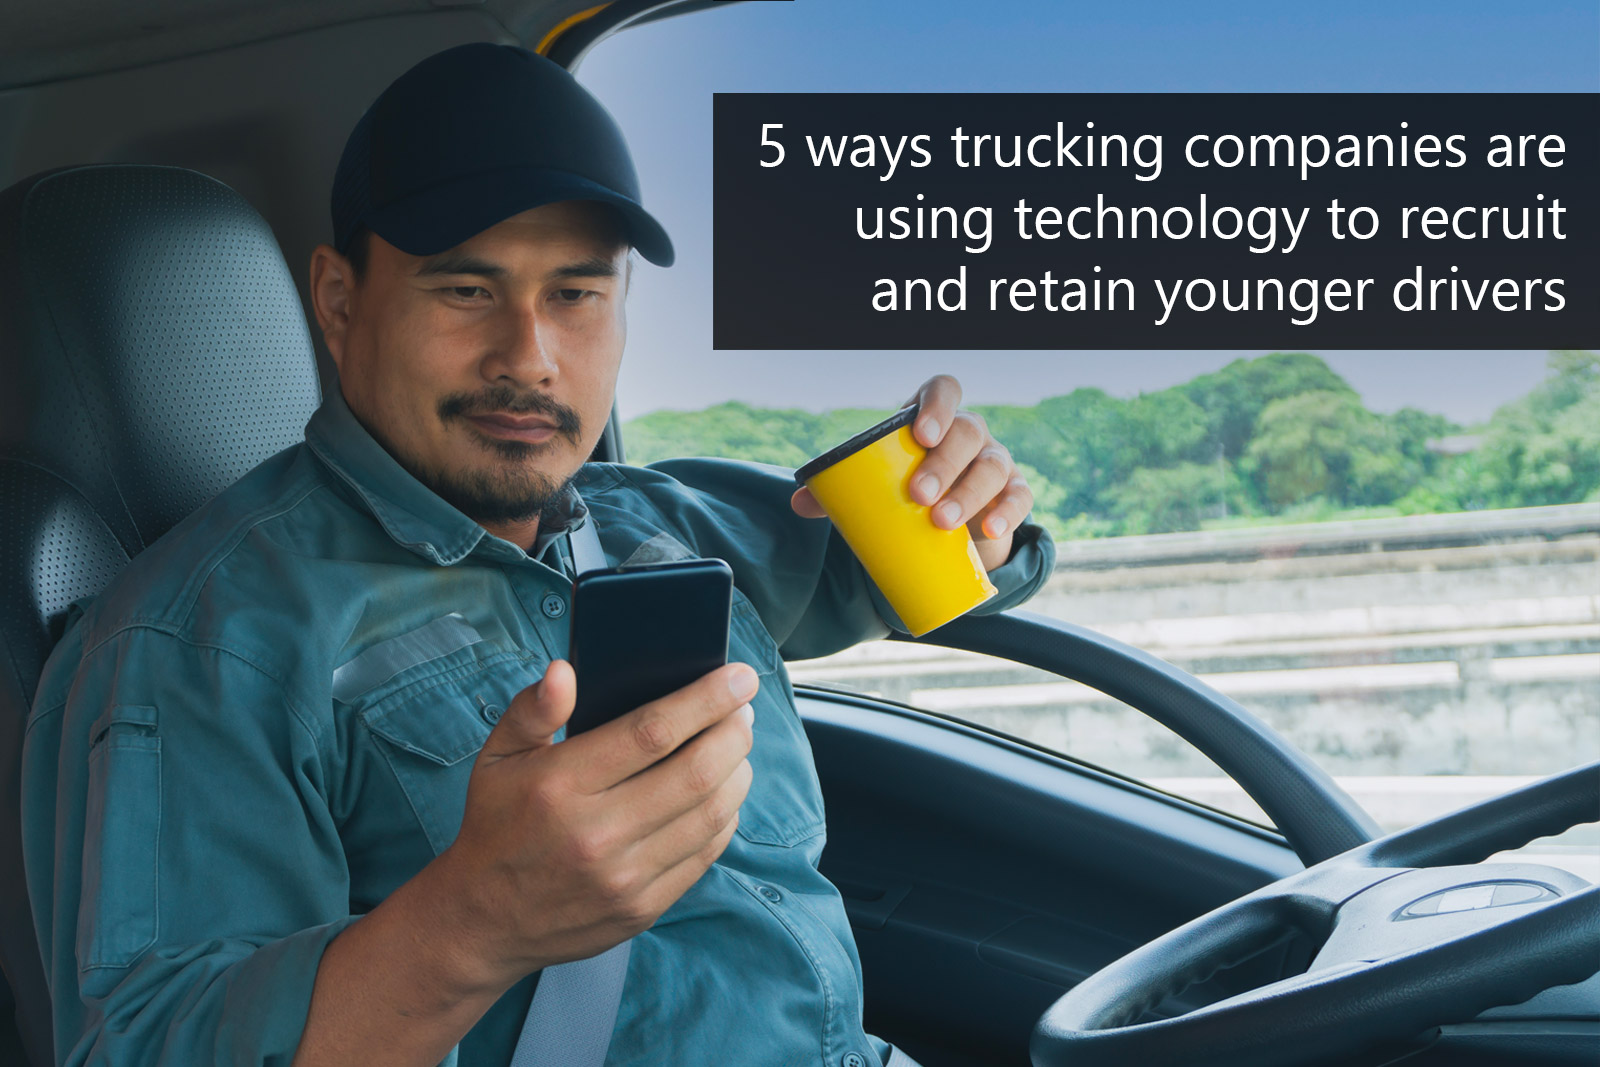 5 Tech Strategies for Trucking Companies to Attract Younger Drivers